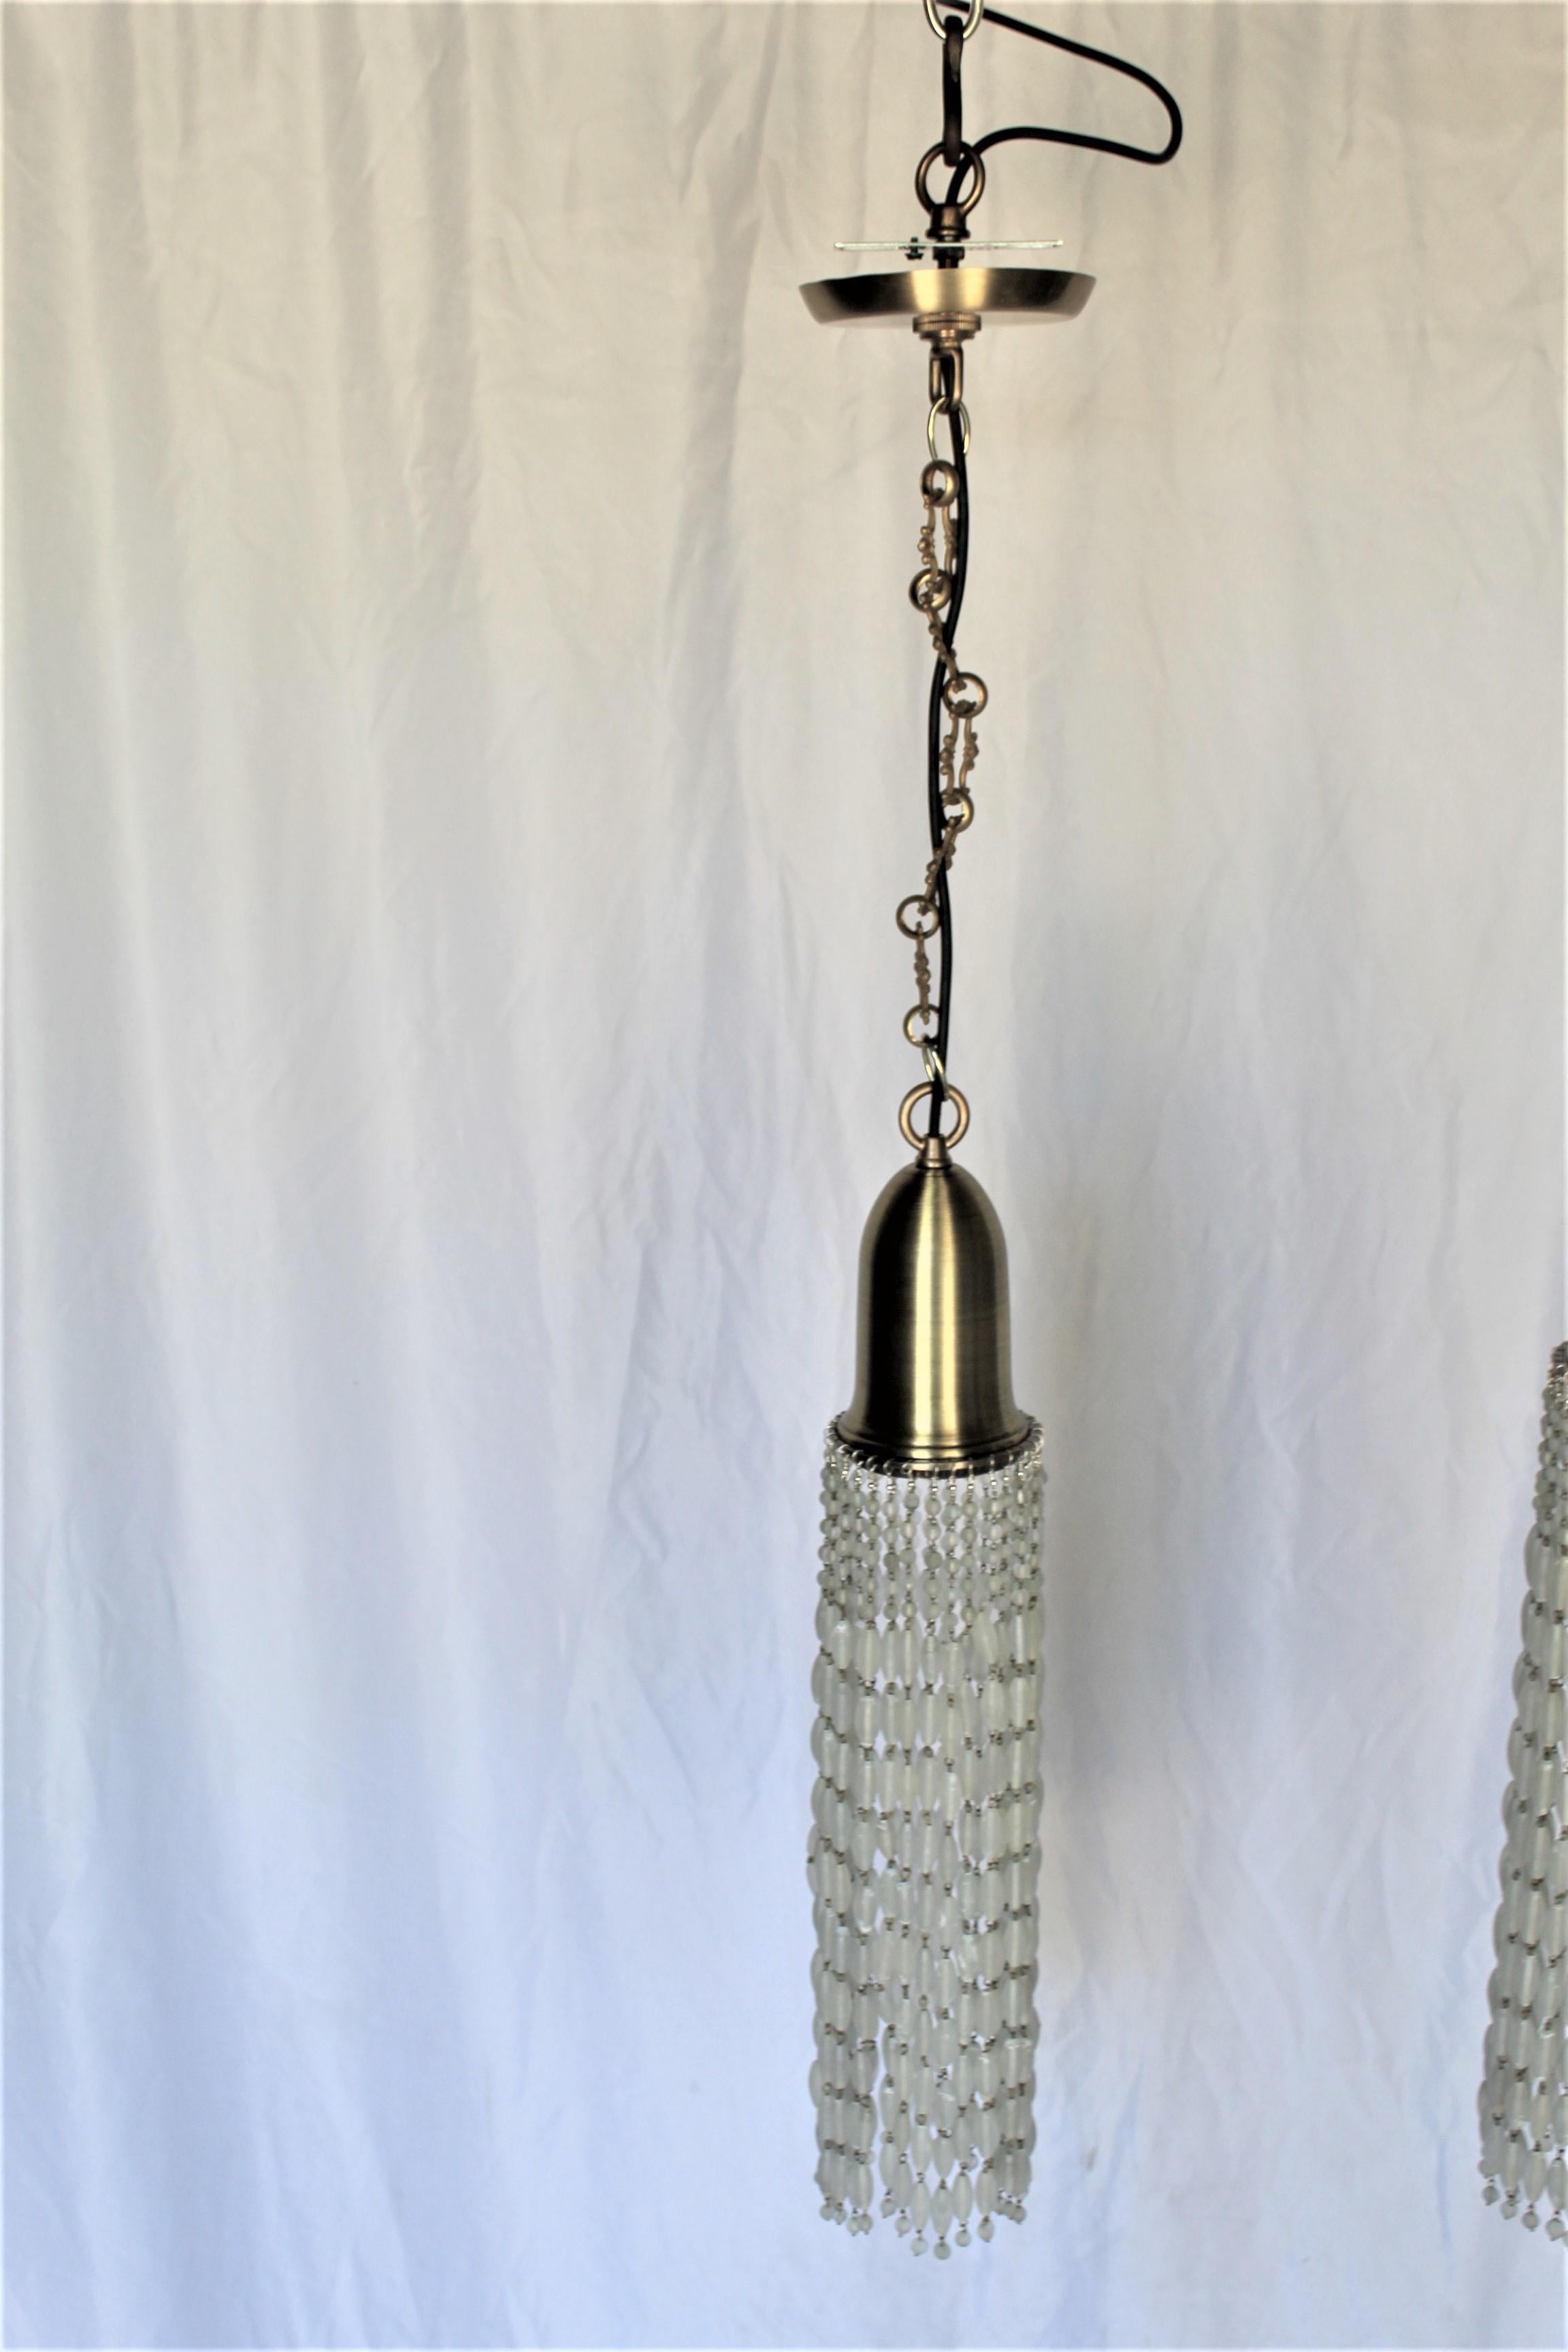 A pair of custom designed and made of solid brass and bronze metal. Shade is in the shape of a bell in spun satin finished brass and is 5 1/2